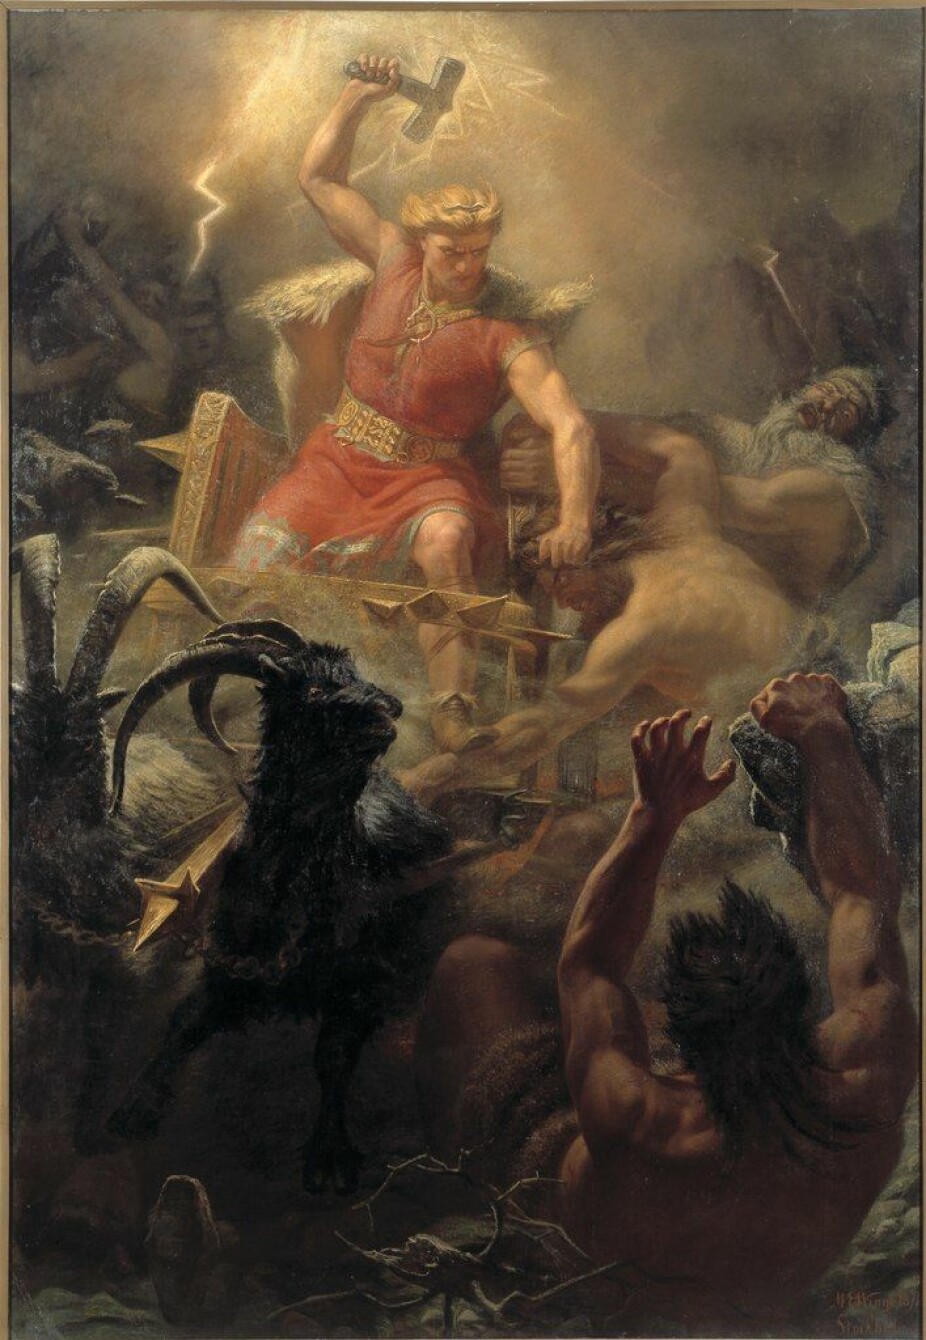 Mjølnir (Mjölnir in English) is the hammer of the Norse thunder god Tor. Mjølnir means “the one who crushes dust”. Thor used the hammer as a weapon in the fight against the Jotnes, as shown here in a painting by Mårten Eskil Winge from 1872.